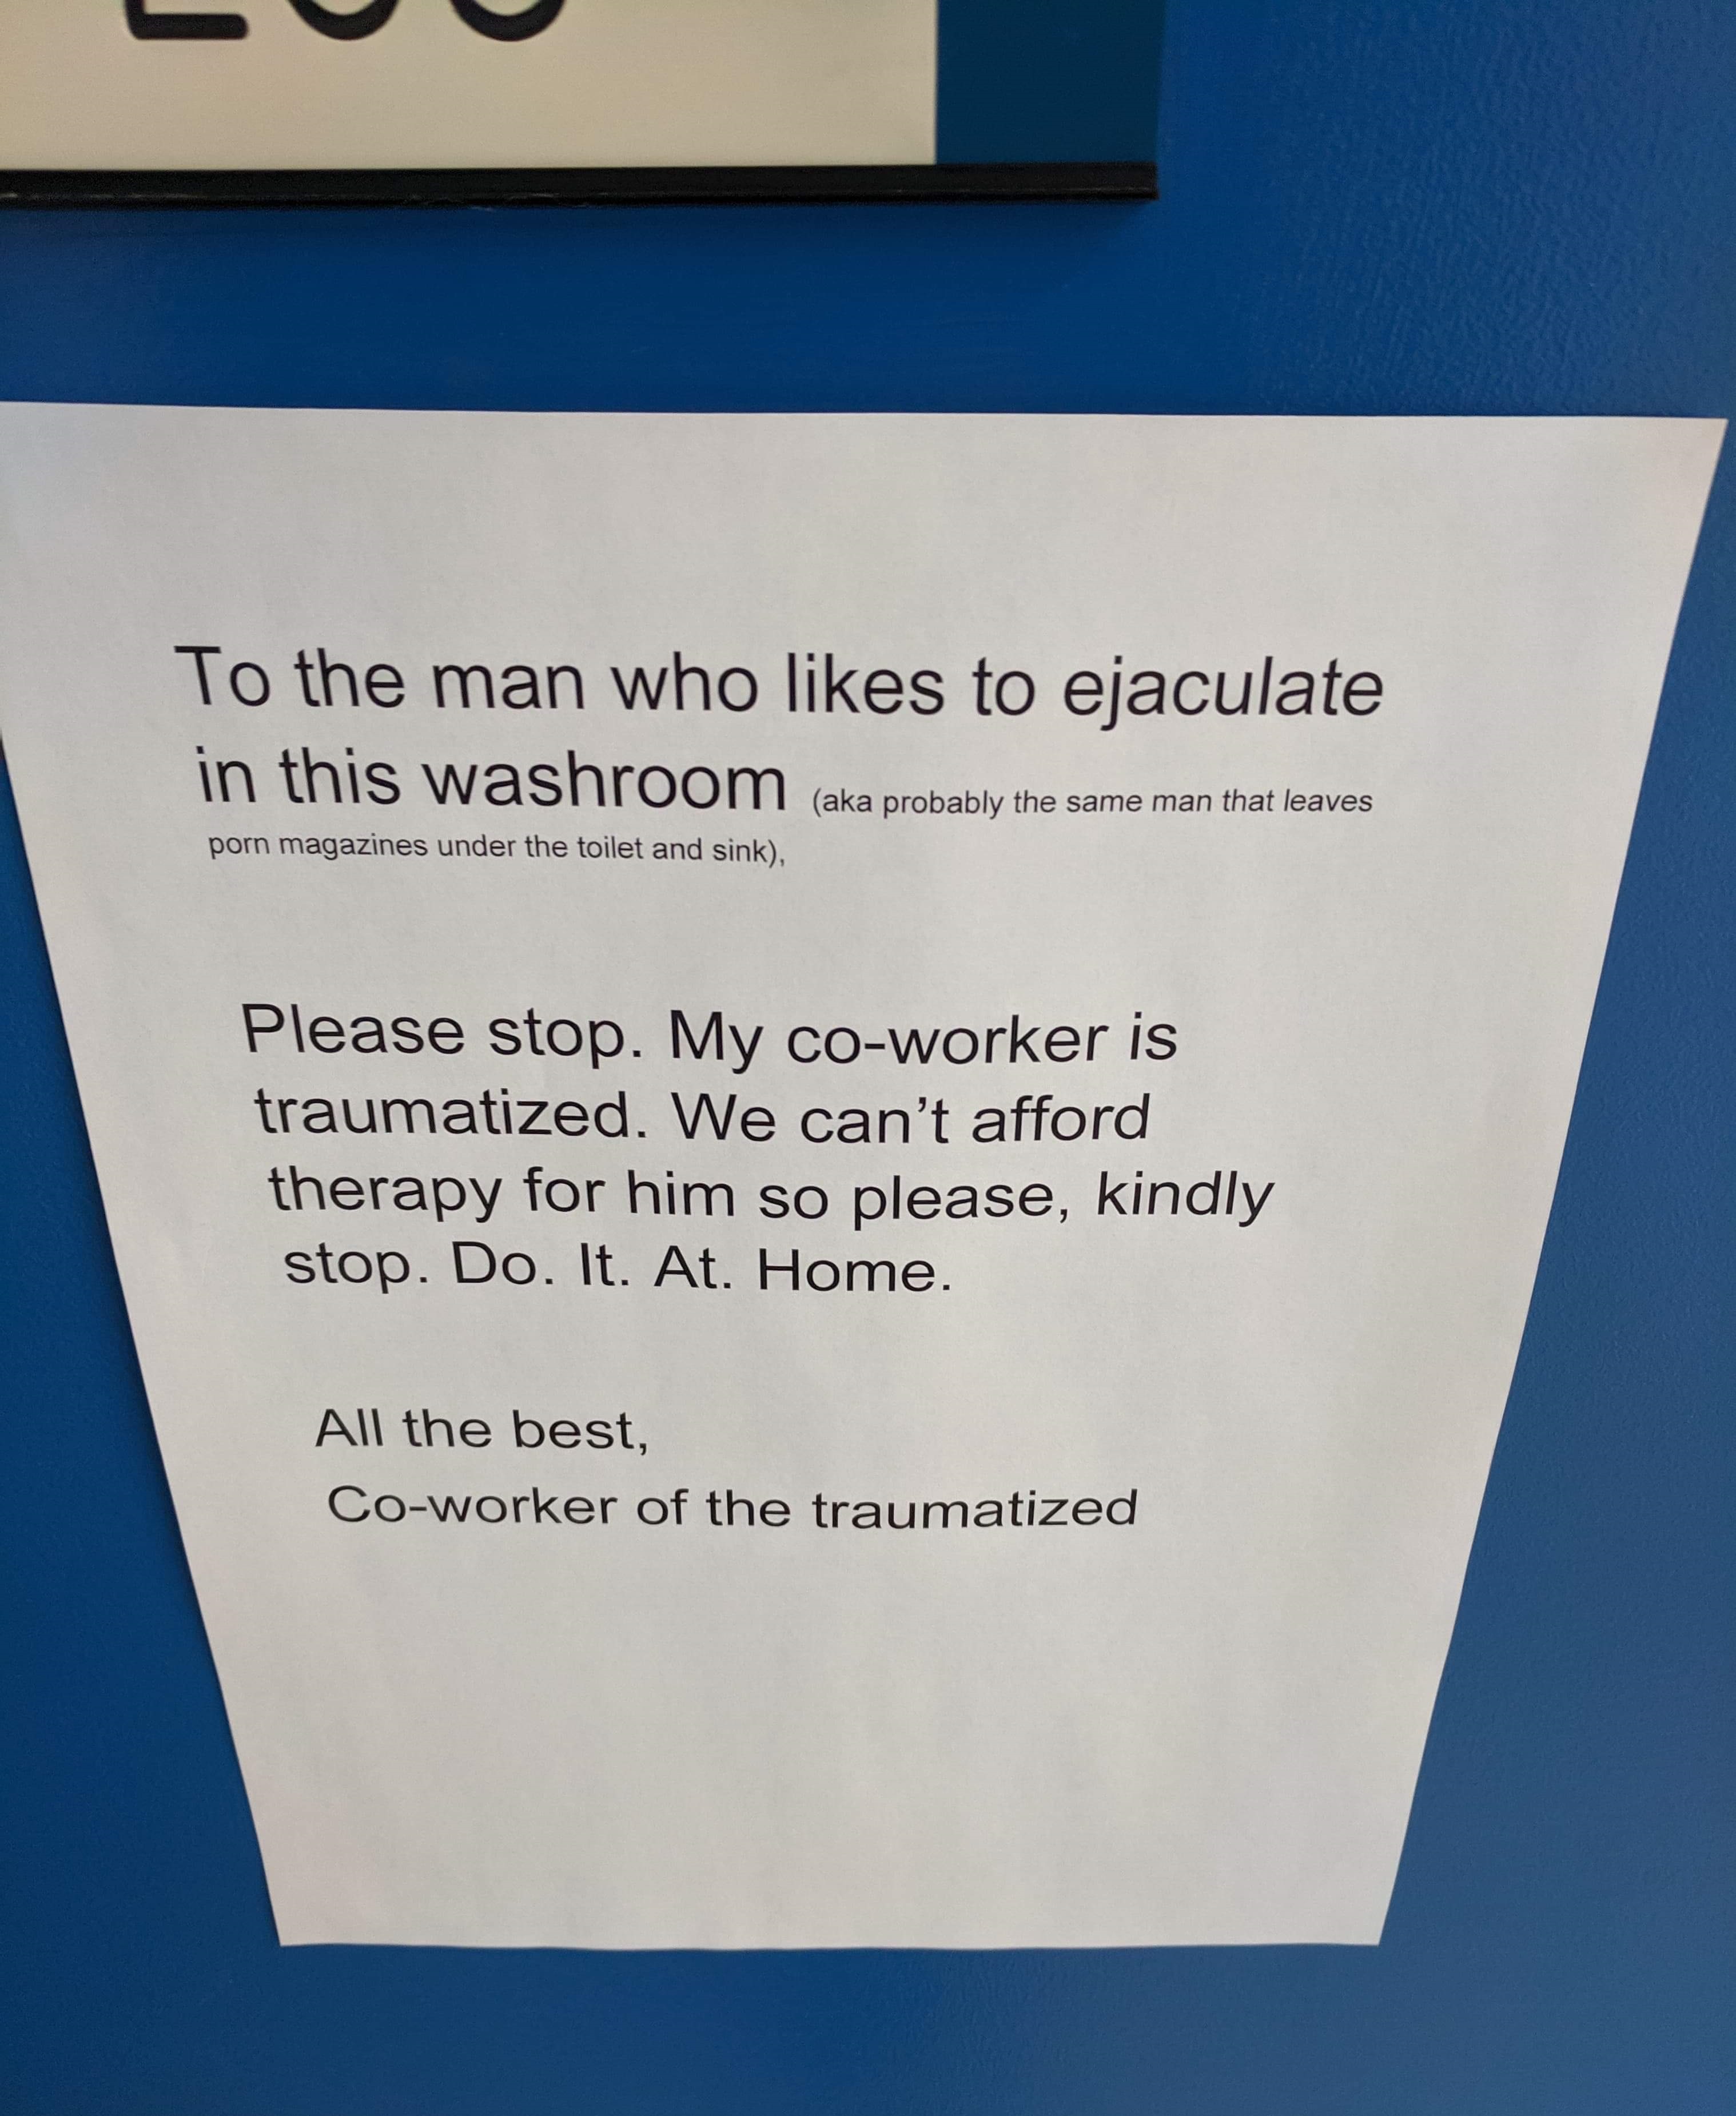 document - To the man who to ejaculate in this washroom a probably the same man that leaves pomagazines under the talet and sin Please stop. My coworker is traumatized. We can't afford therapy for him so please, kindly stop. Do. It. At. Home. All the best